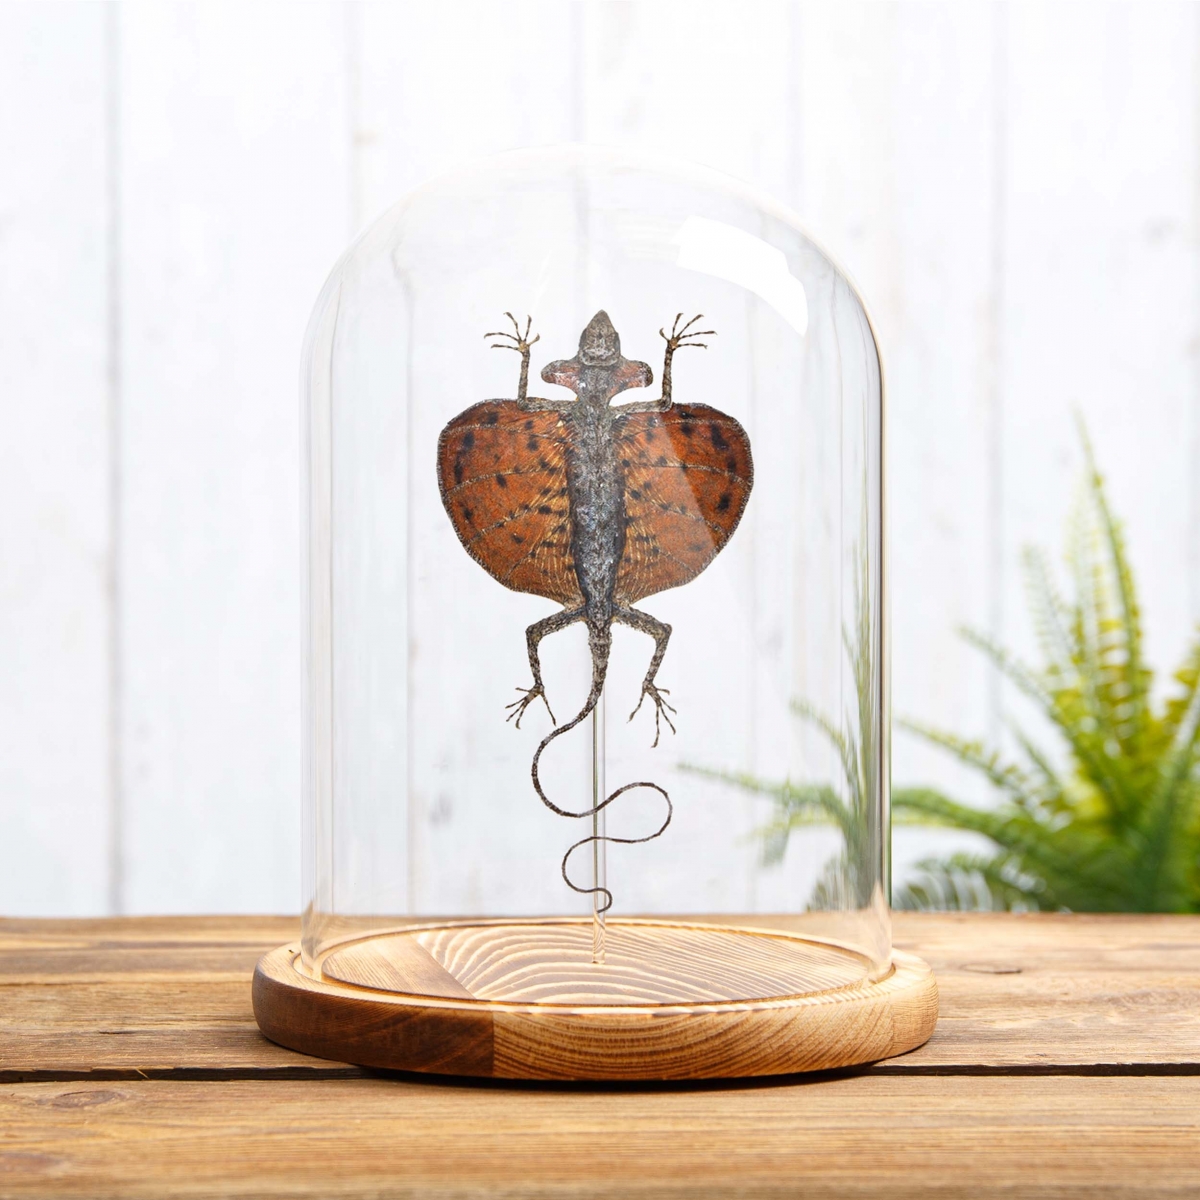 Red Flying Lizard in Glass Dome with Wooden Base (Draco haematopogon)